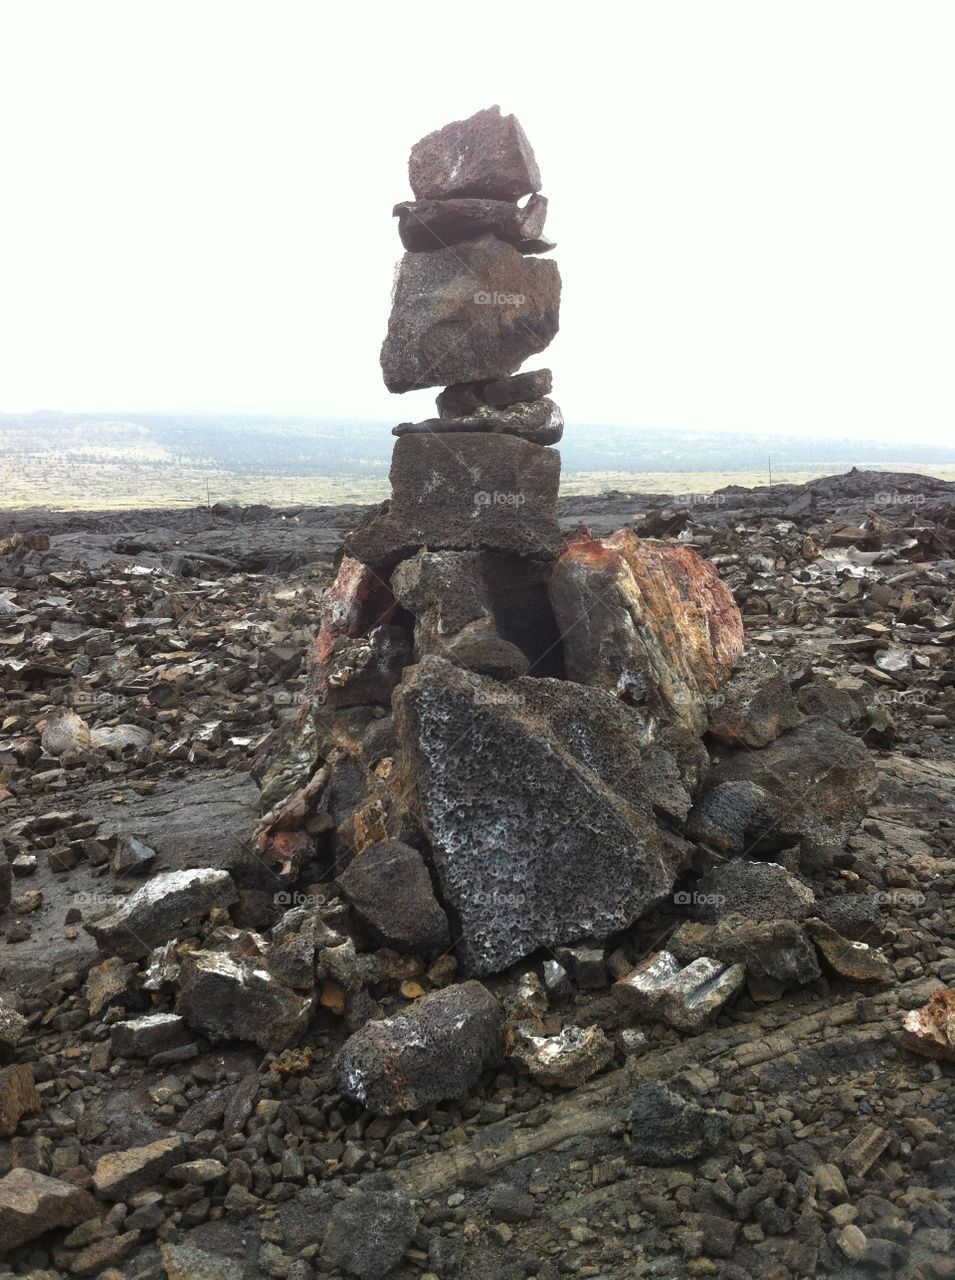 standing rock formation. I stumbled upon this tower of rocks while walking a lava field just outside of Kona, Hawaii.